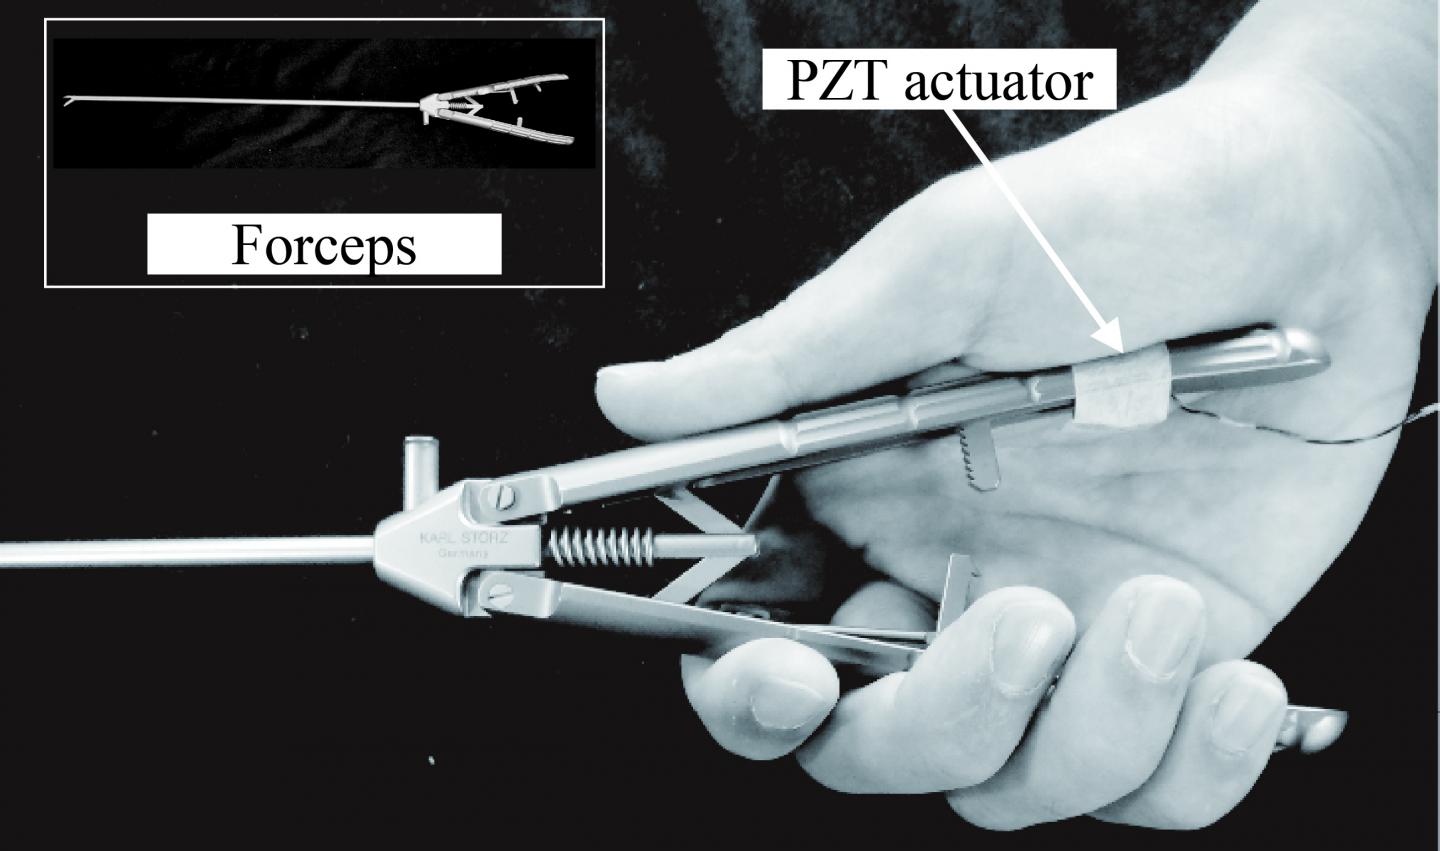 View of the PZT Actuator Attached to Standard Surgical Forceps During Laparoscopic Surgery